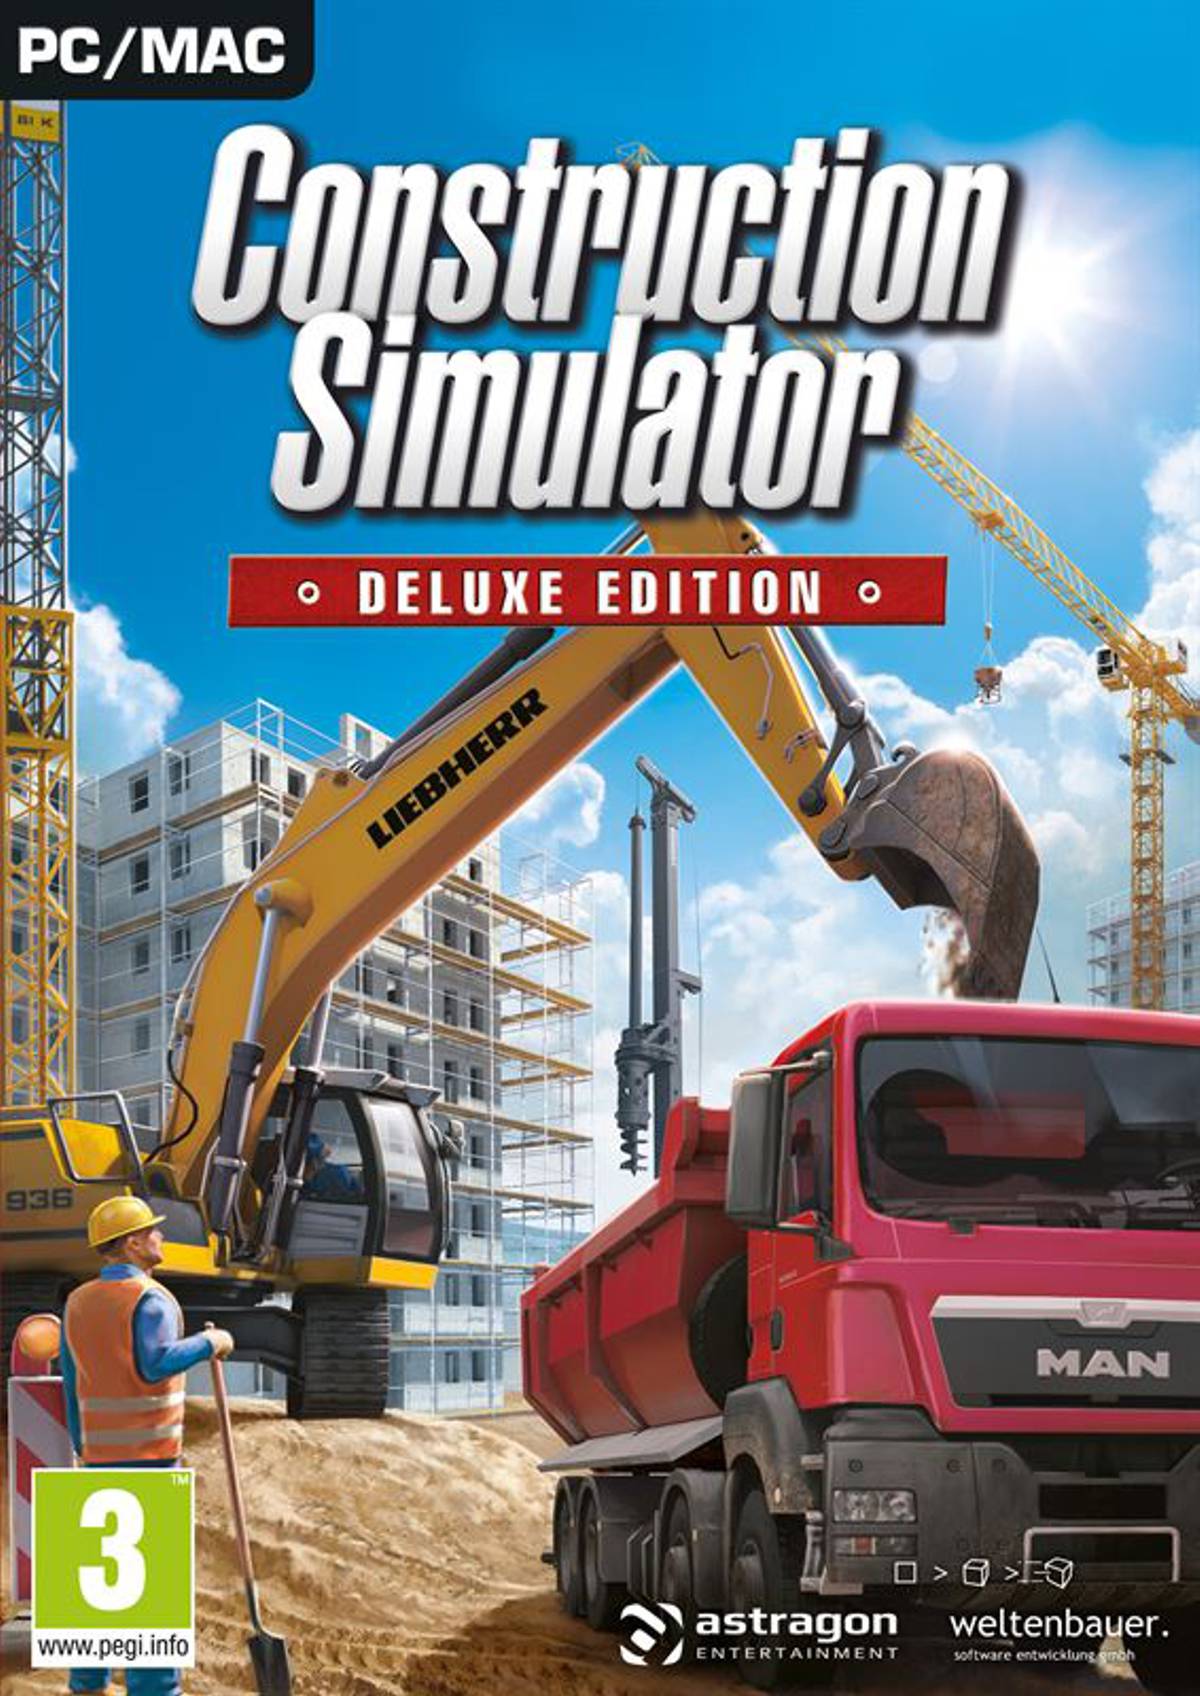 The new Construction Simulator Deluxe edition for PC and Mac is out now!